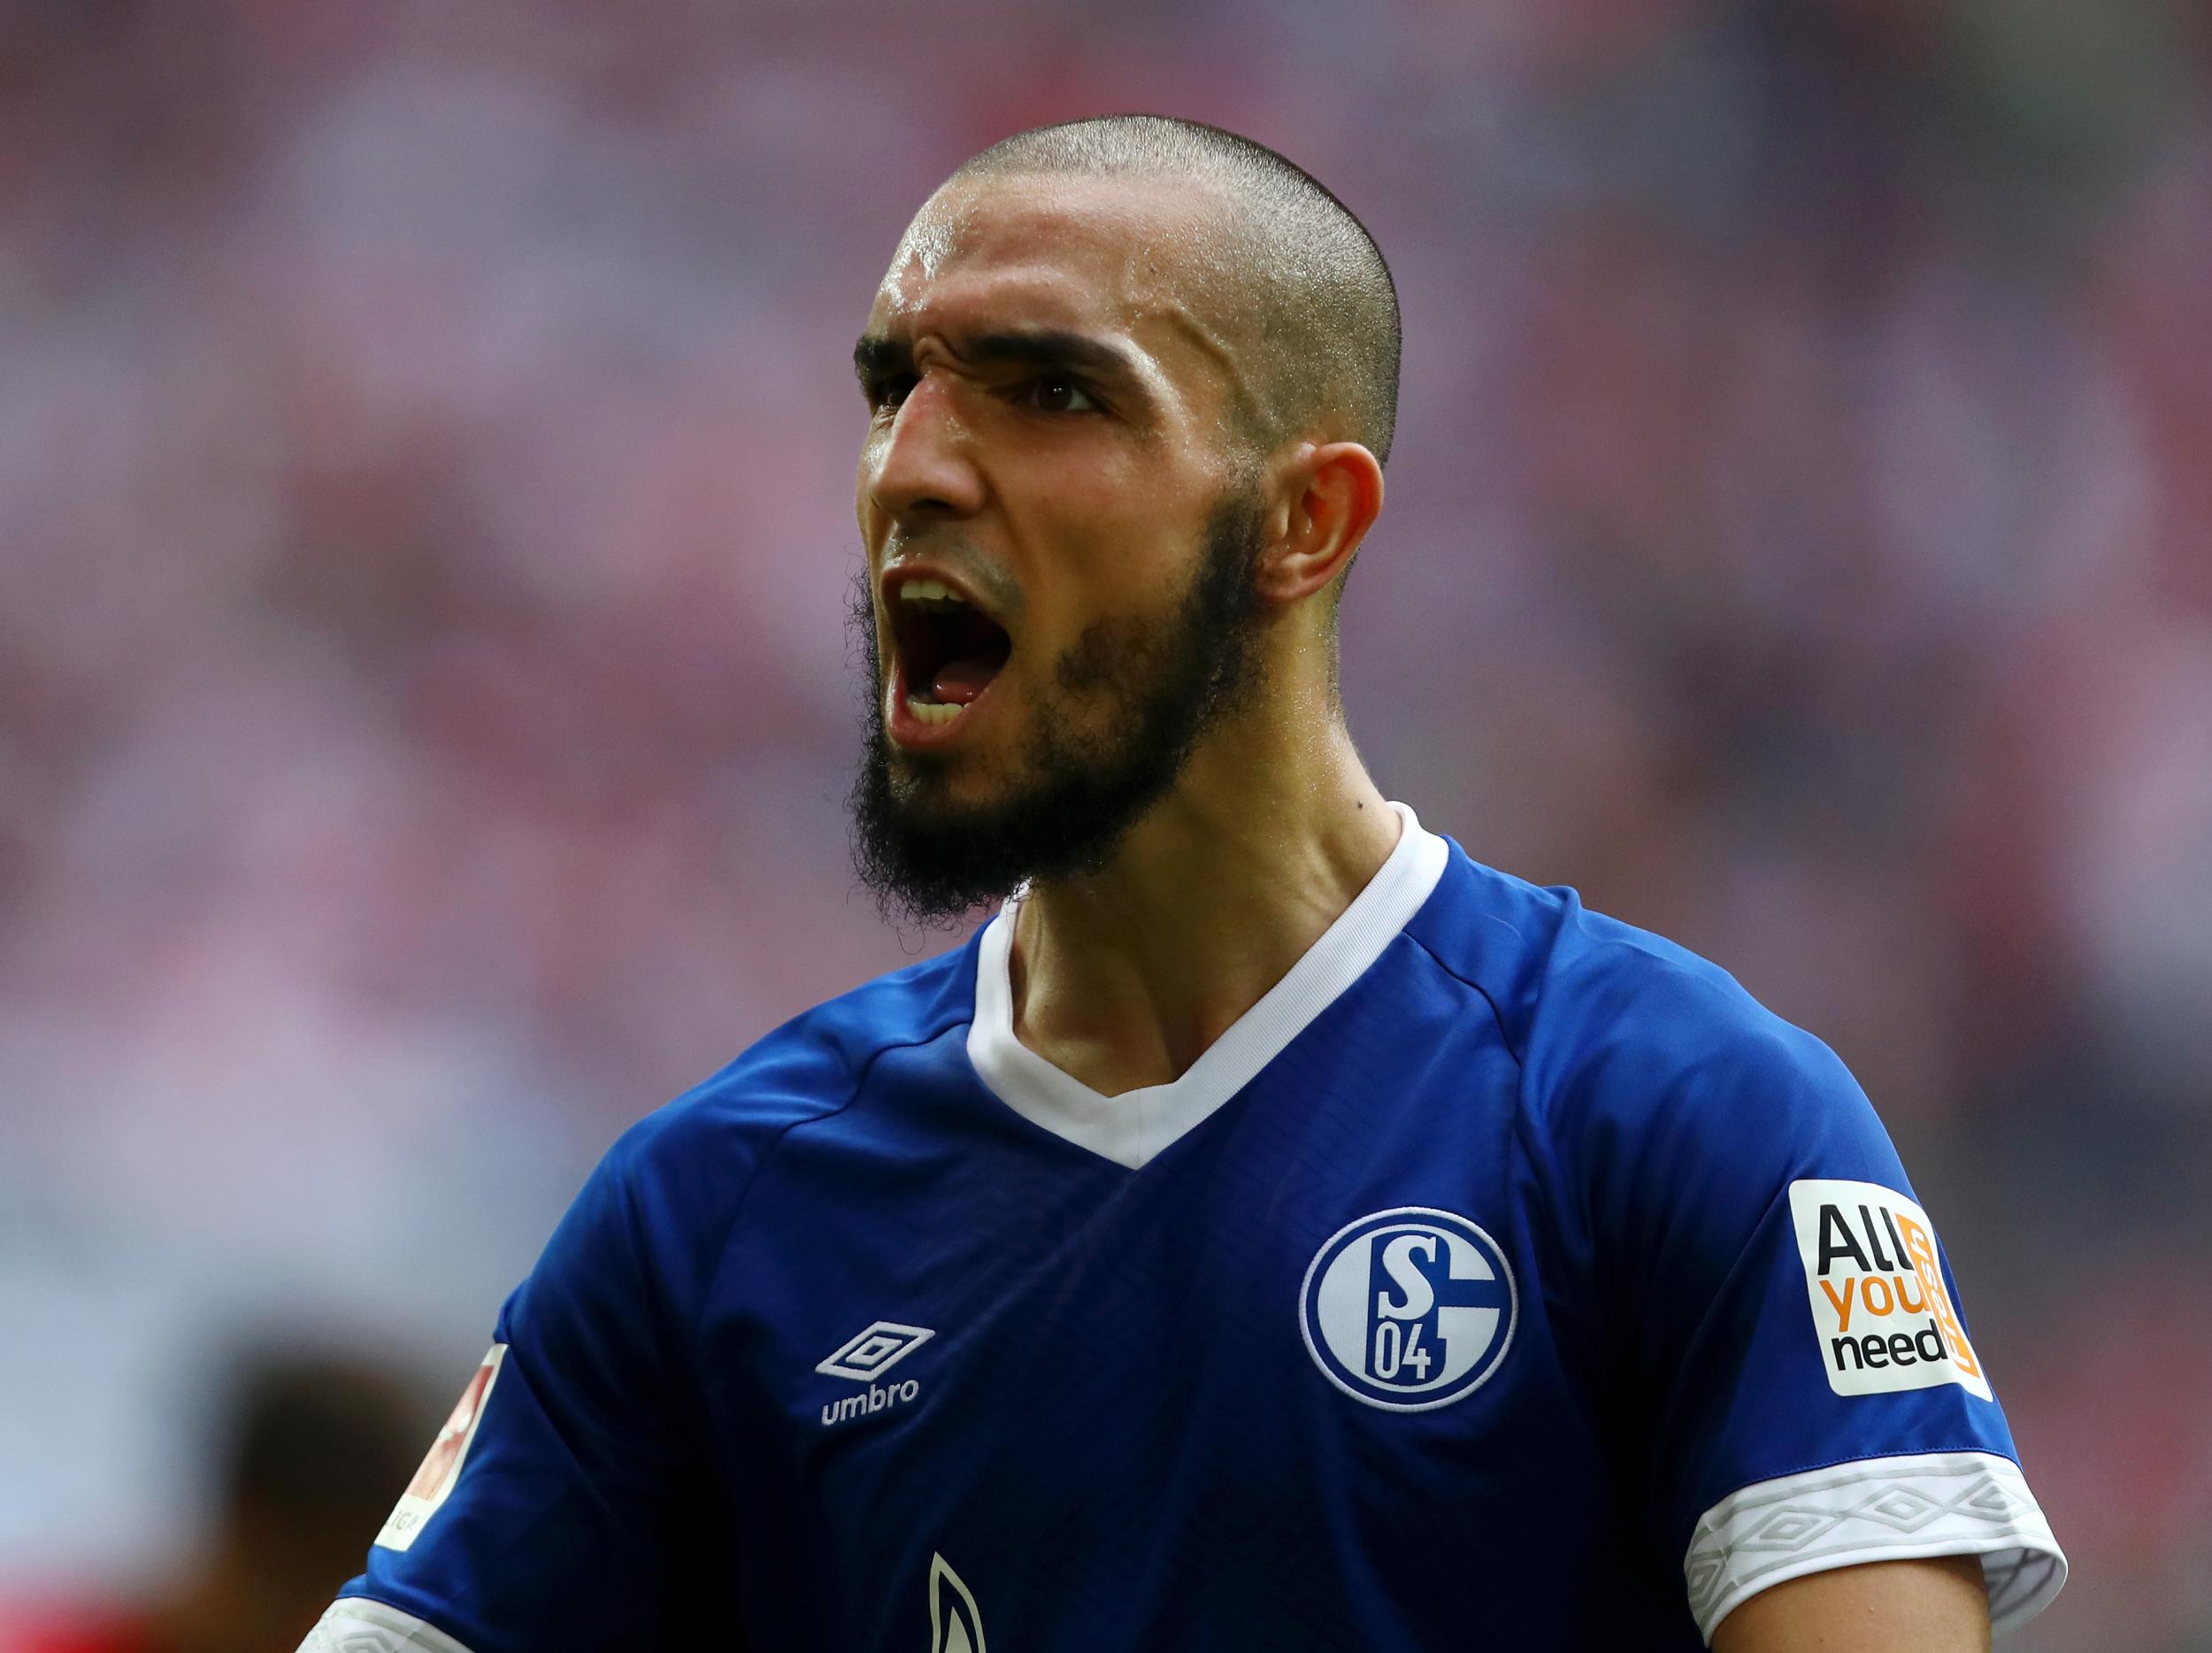 Nabil Bentaleb is poised to join Newcastle